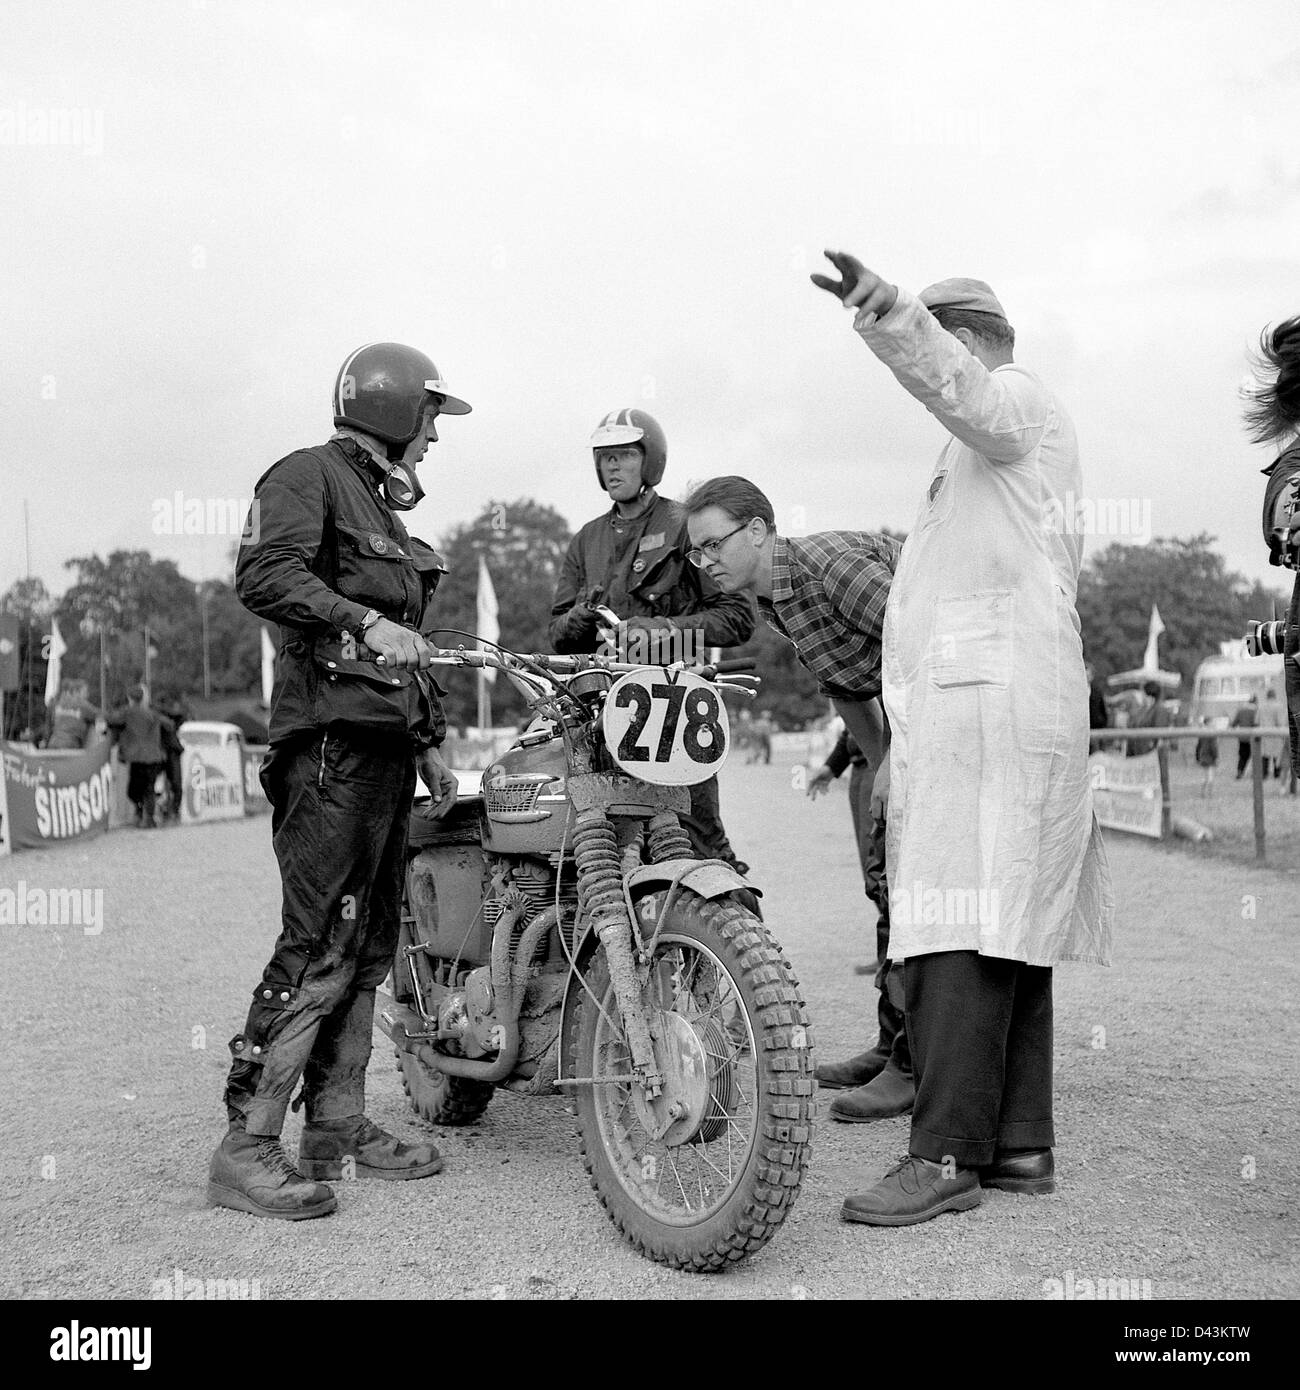 US actor Steve McQueen (L) prepares for a ride during a rest as he took  part in the international motorcycle race "Six Days" on his Triumph with  the number "278" at in